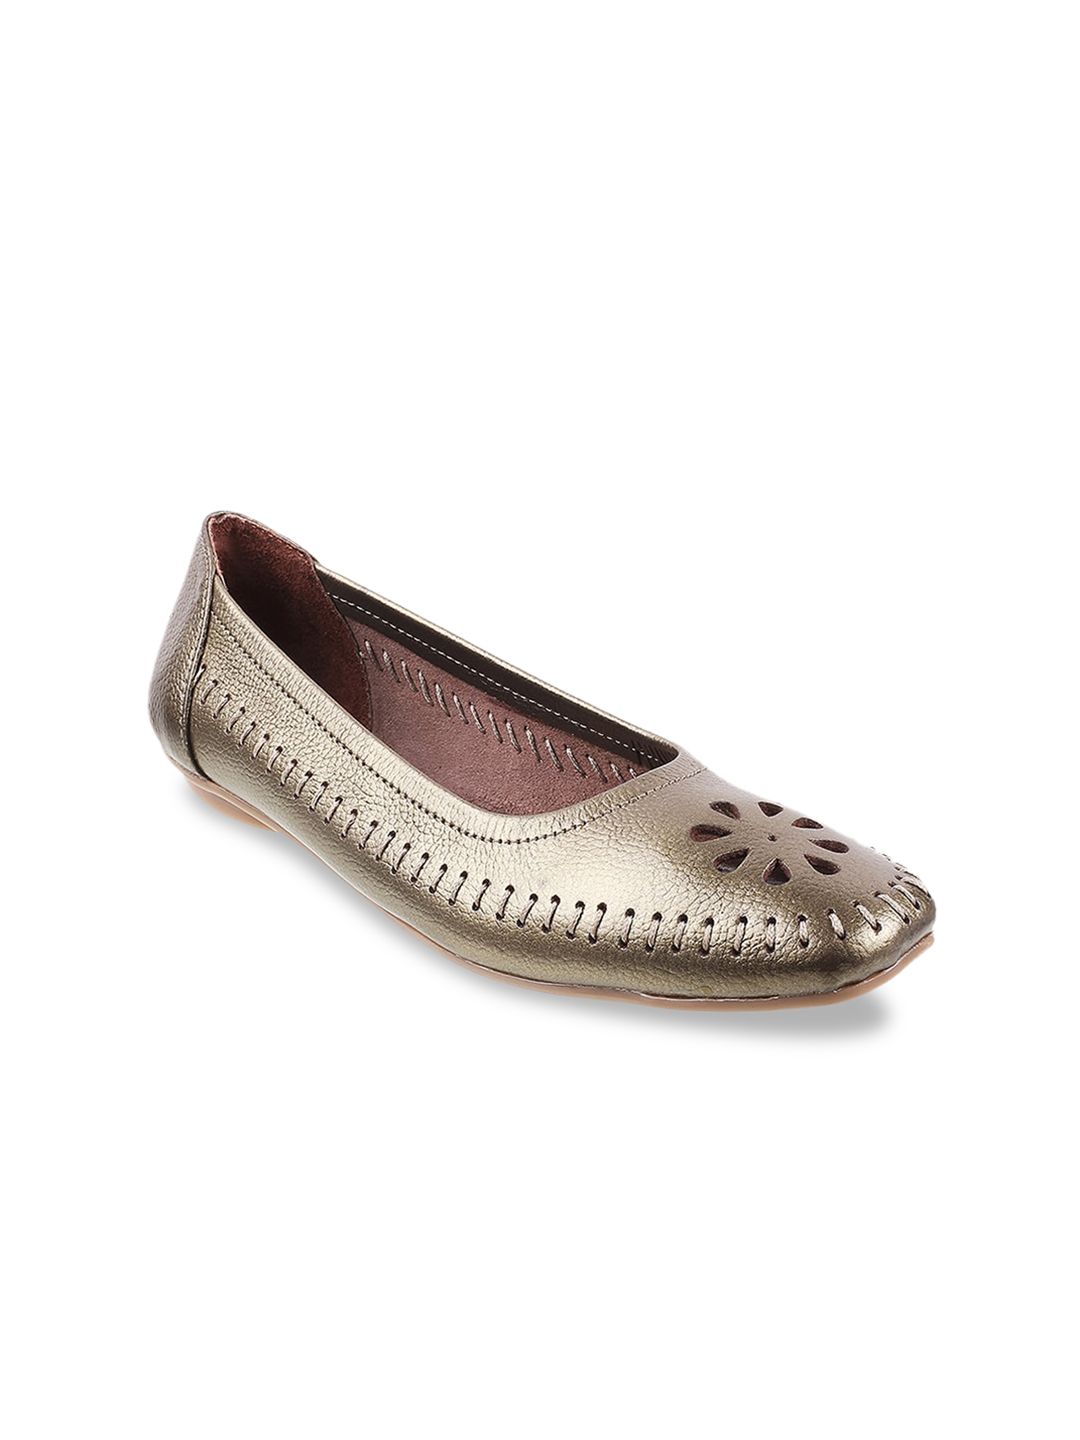 Mochi Women Bronze-Toned Ballerinas Flats with Laser Cuts Price in India